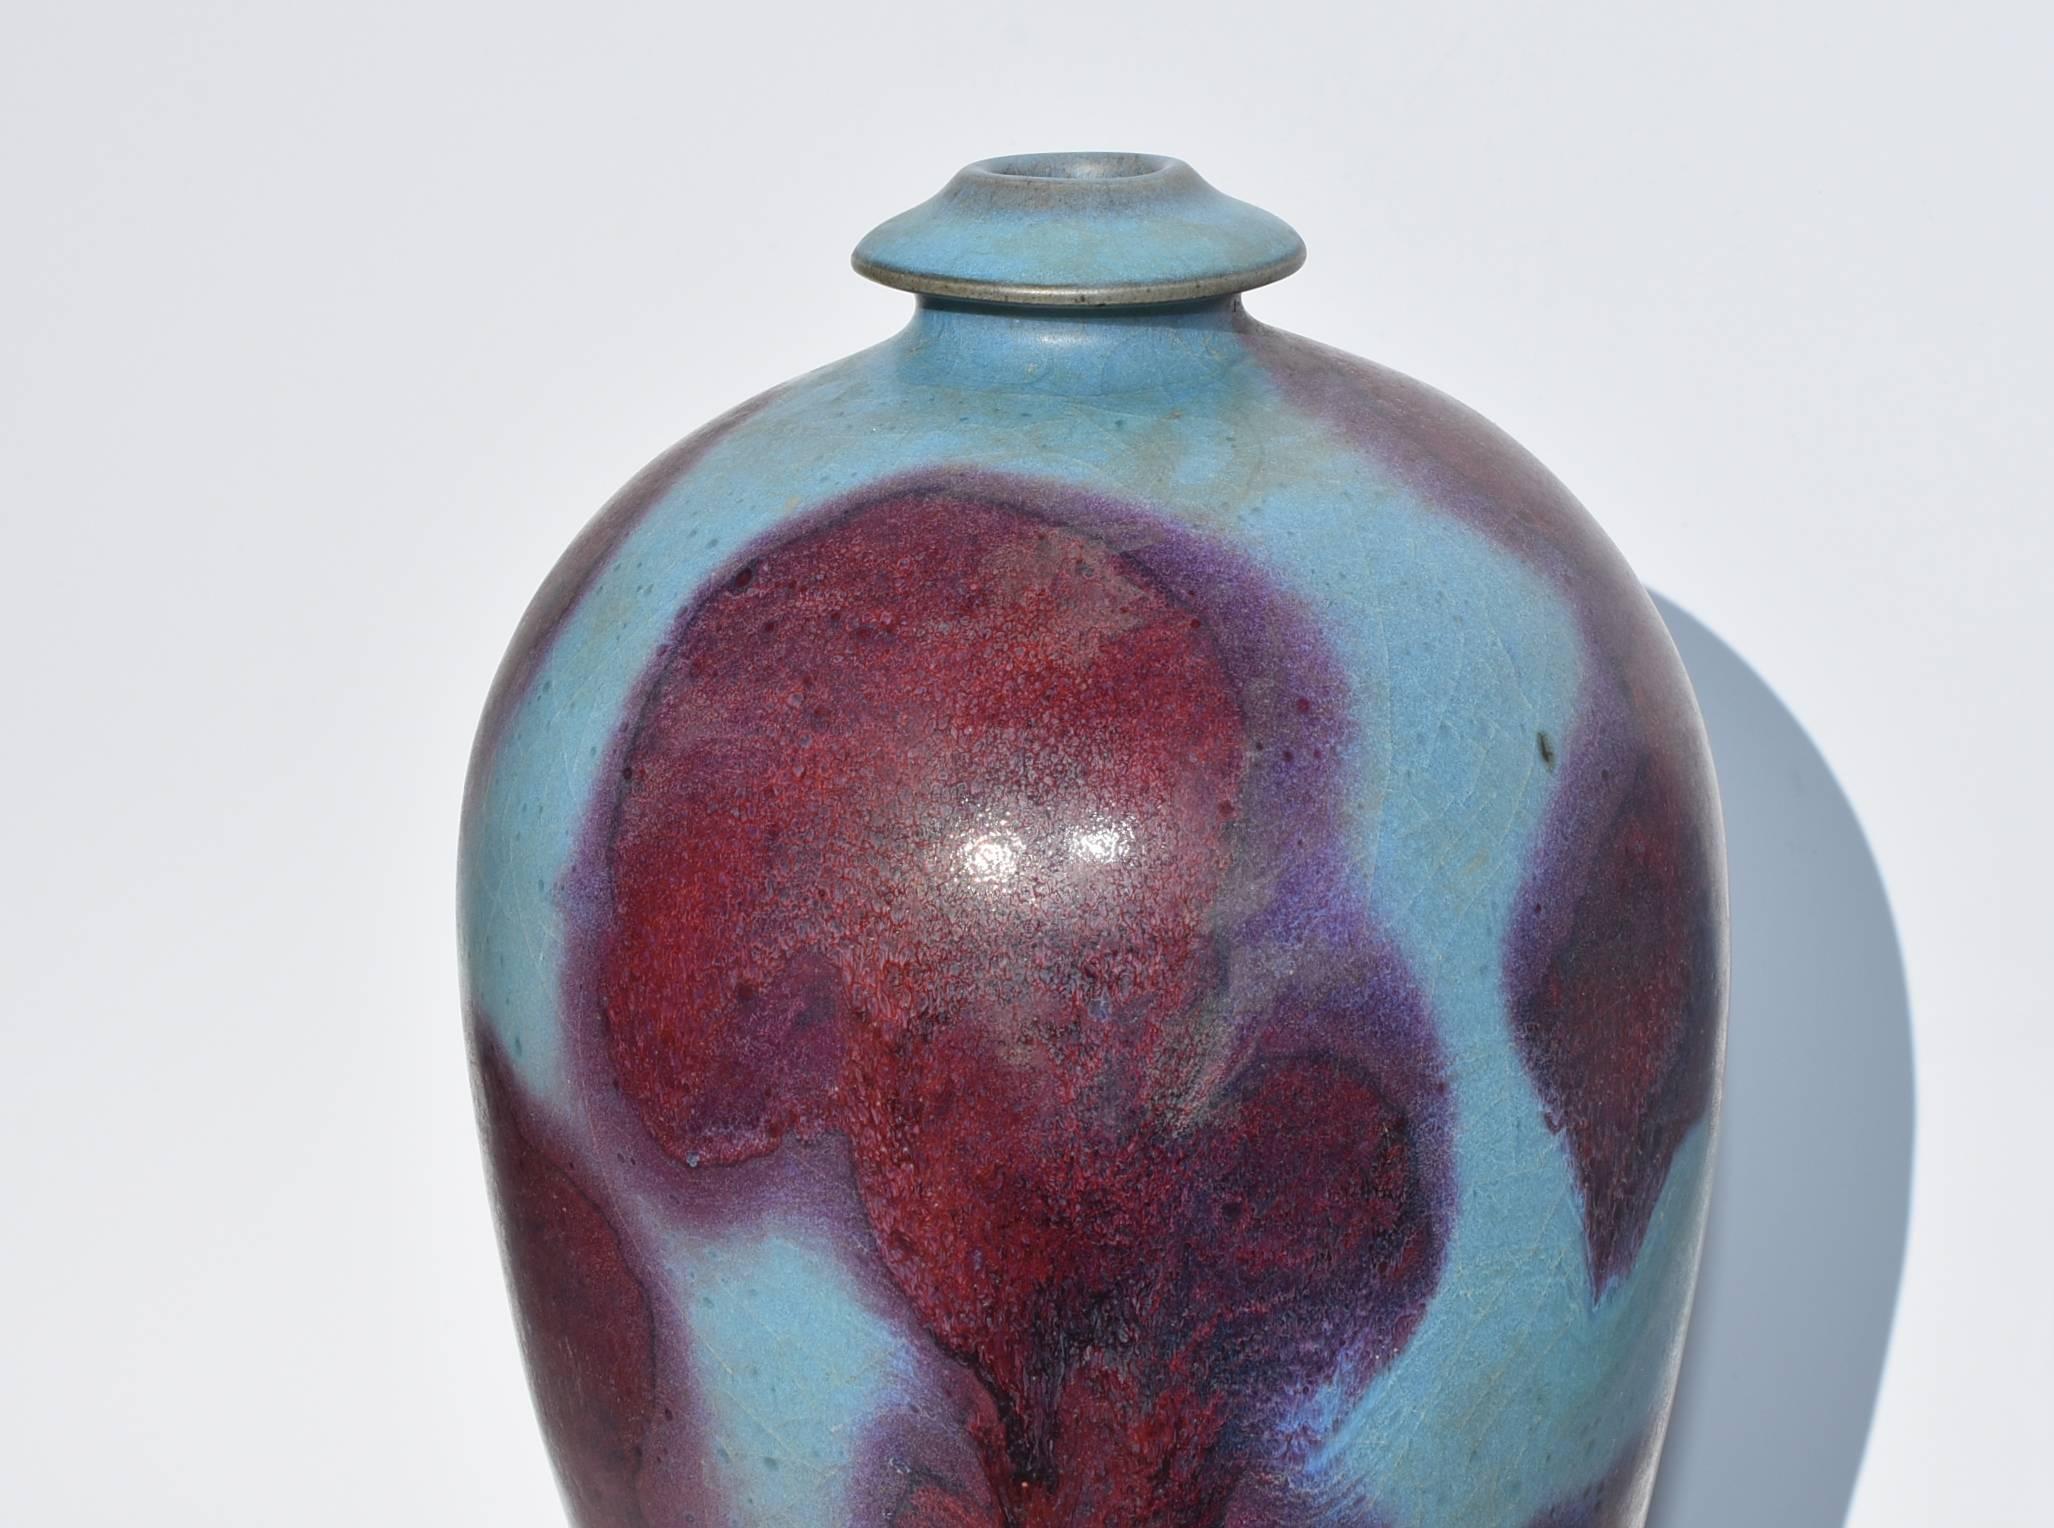 A splendid Jun ware porcelain Mei vase. Jun is one of the most important kilns in China originated in Tang dynasty that is known for producing porcelains with rare, one of a kind colors. Porcelain go into the kiln colorless, but emerges with